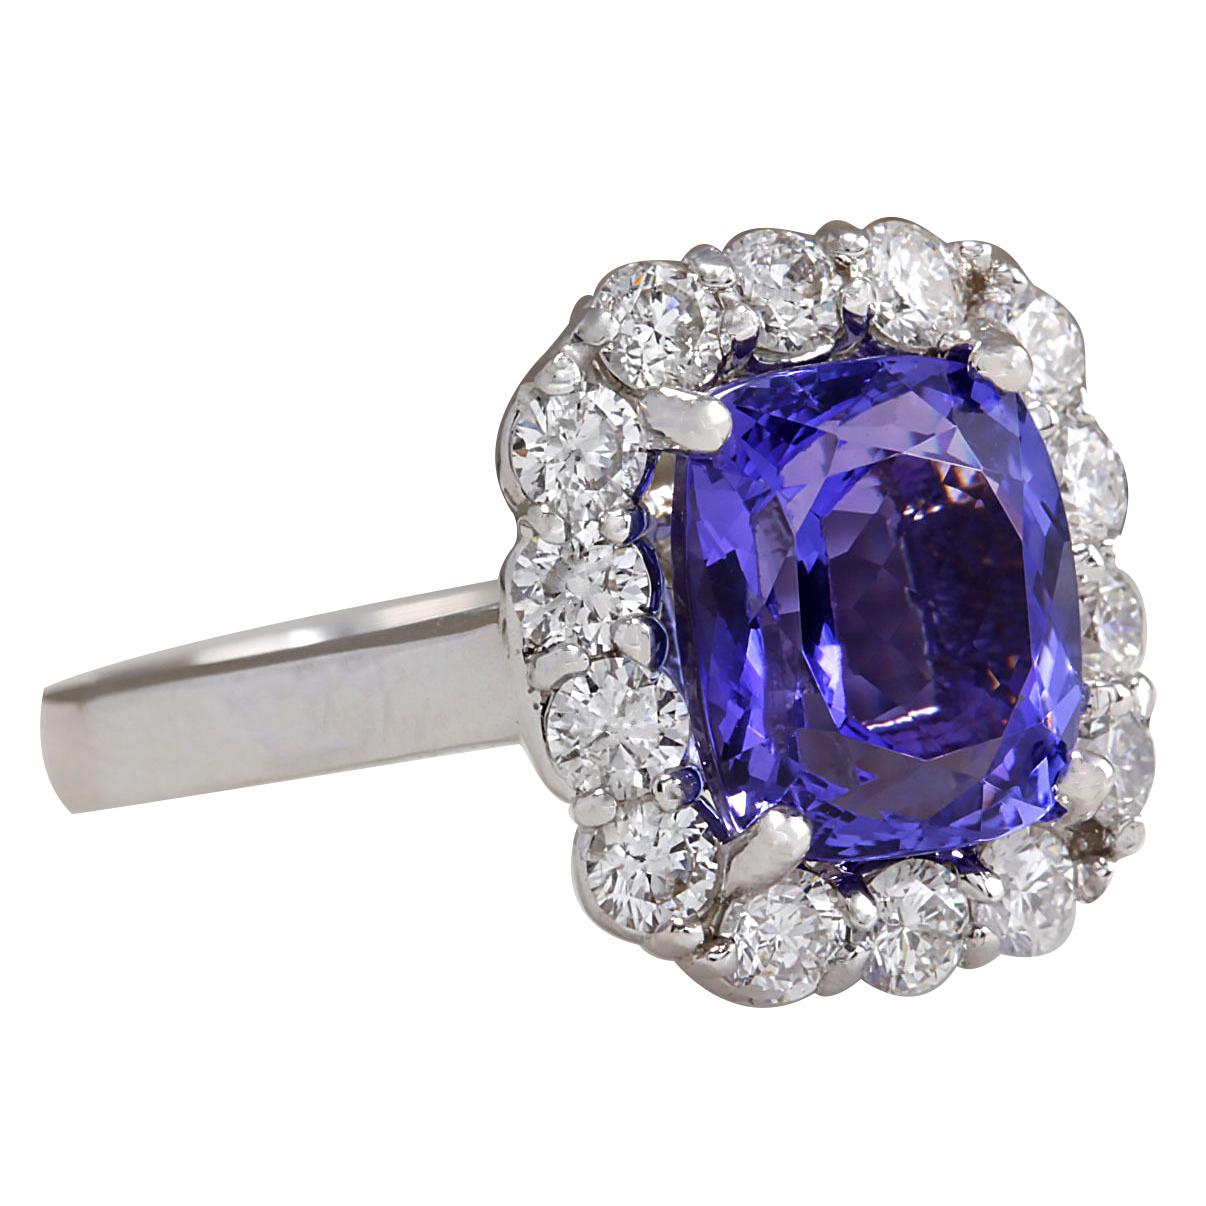 Stamped: 14K White Gold
Total Ring Weight: 5.5 Grams
Total Natural Tanzanite Weight is 3.92 Carat (Measures: 10.00x8.00 mm)
Color: Blue
Total Natural Diamond Weight is 1.05 Carat
Color: F-G, Clarity: VS2-SI1
Face Measures: 14.80x13.40 mm
Sku: